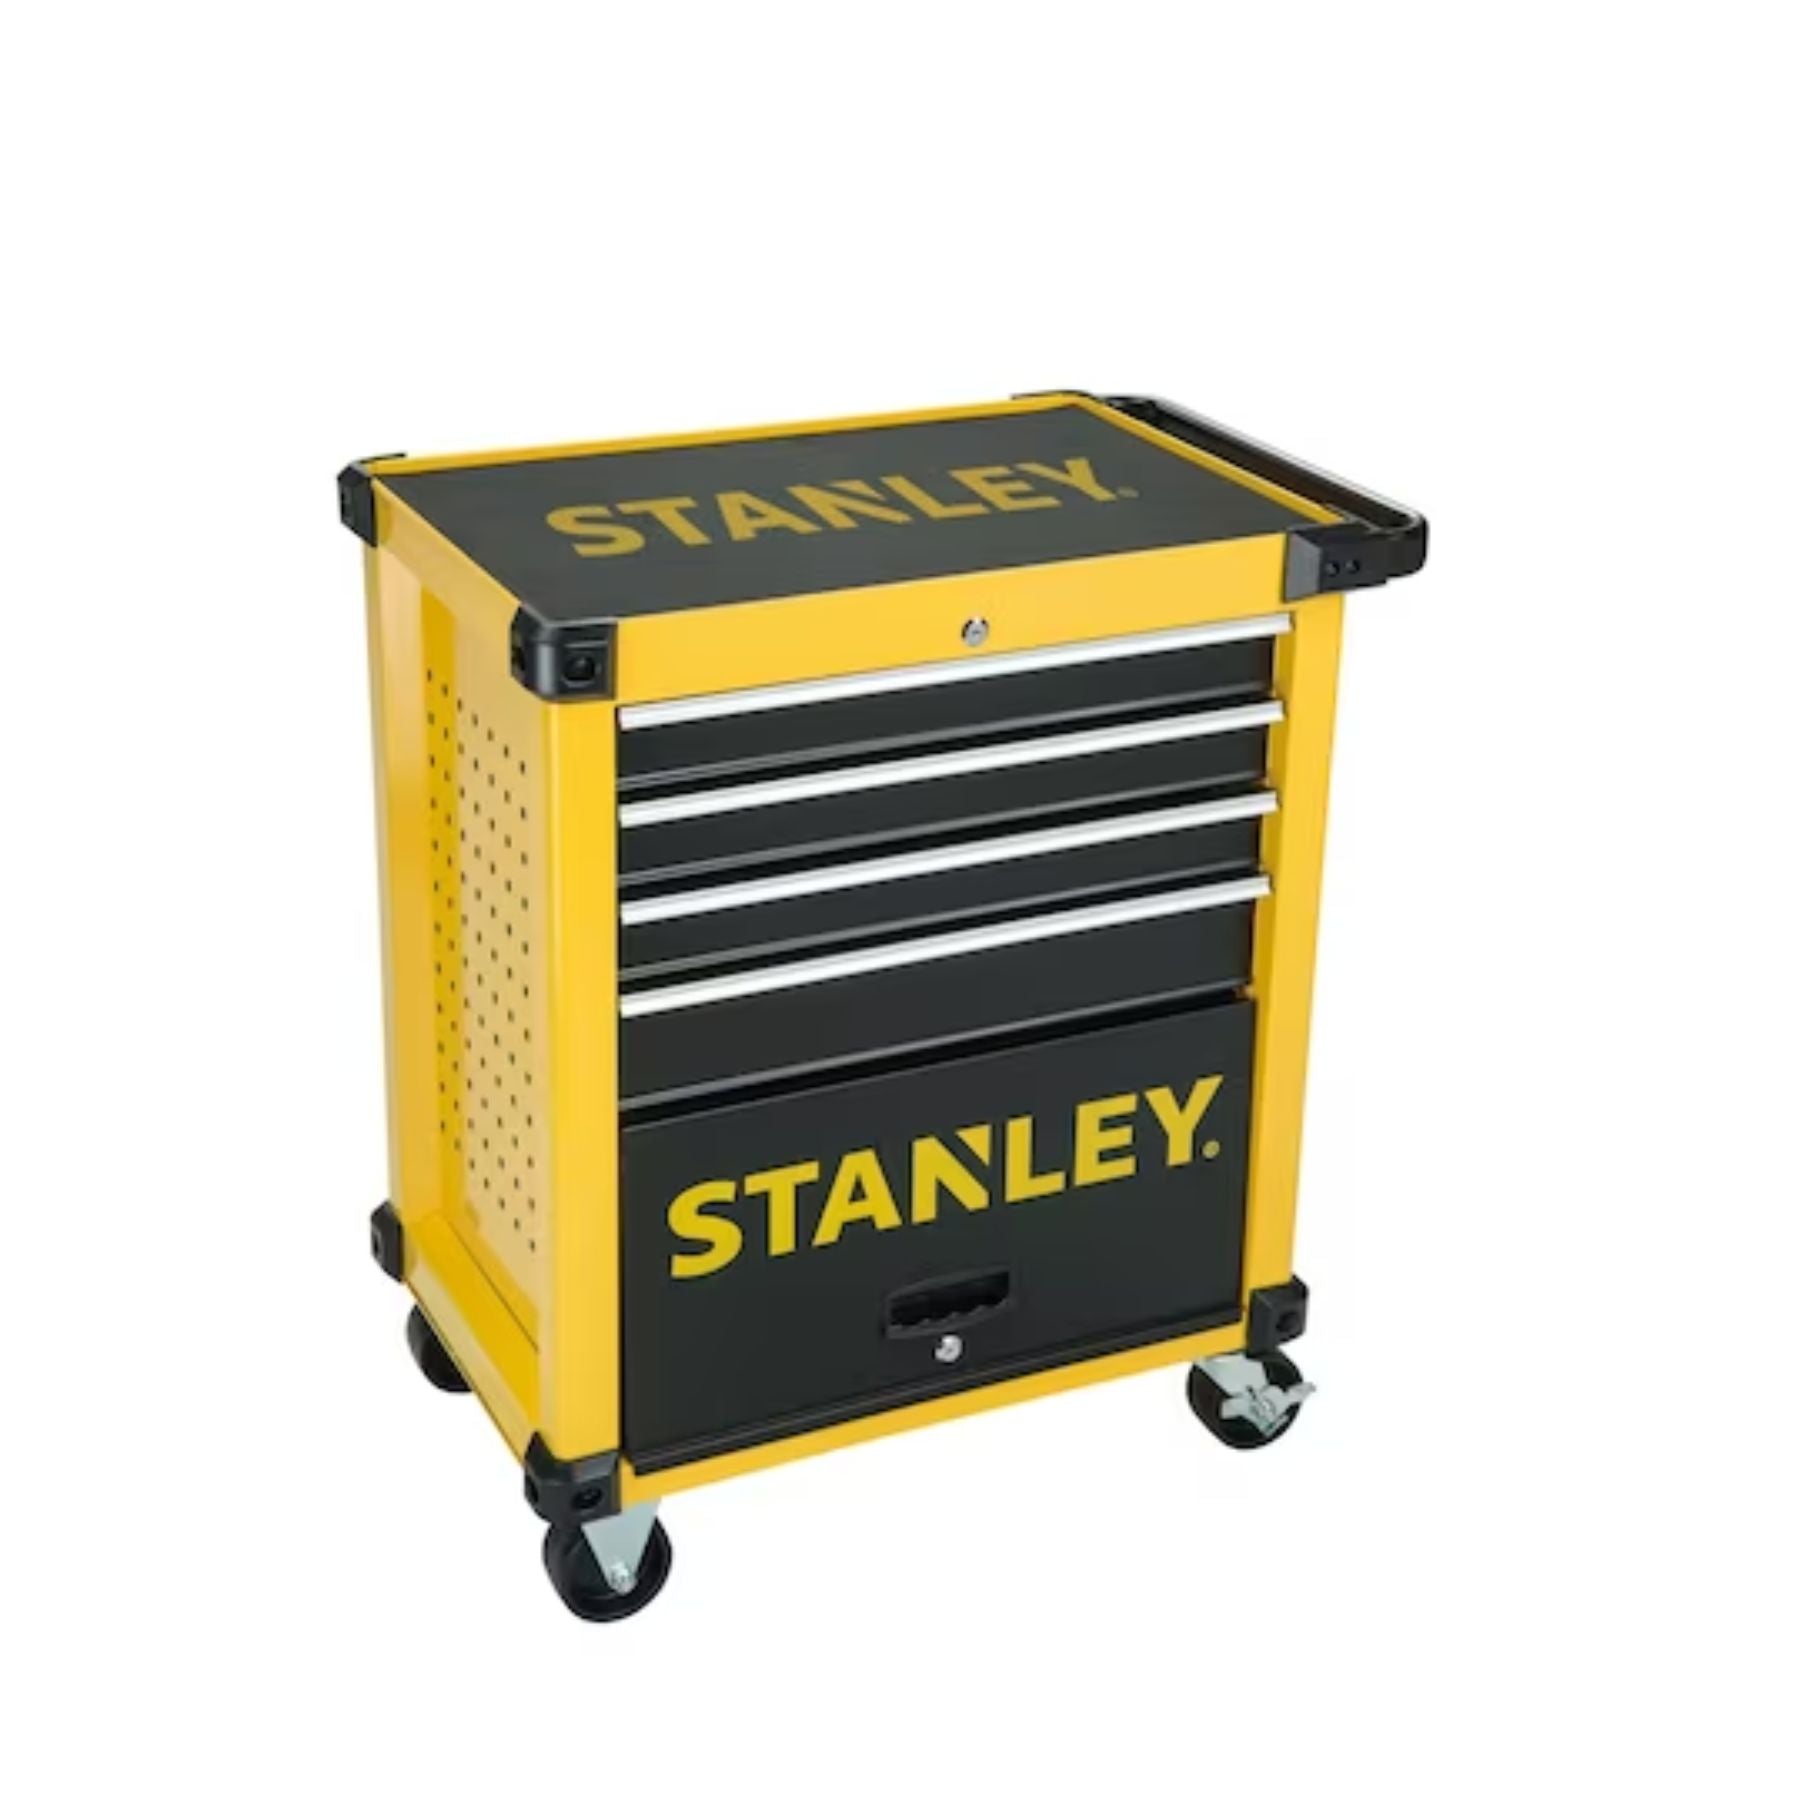 Stanley (STMT1-74305) TRANSMODULE SYSTEM 27in. 4 drawer roller cabinet - yellow